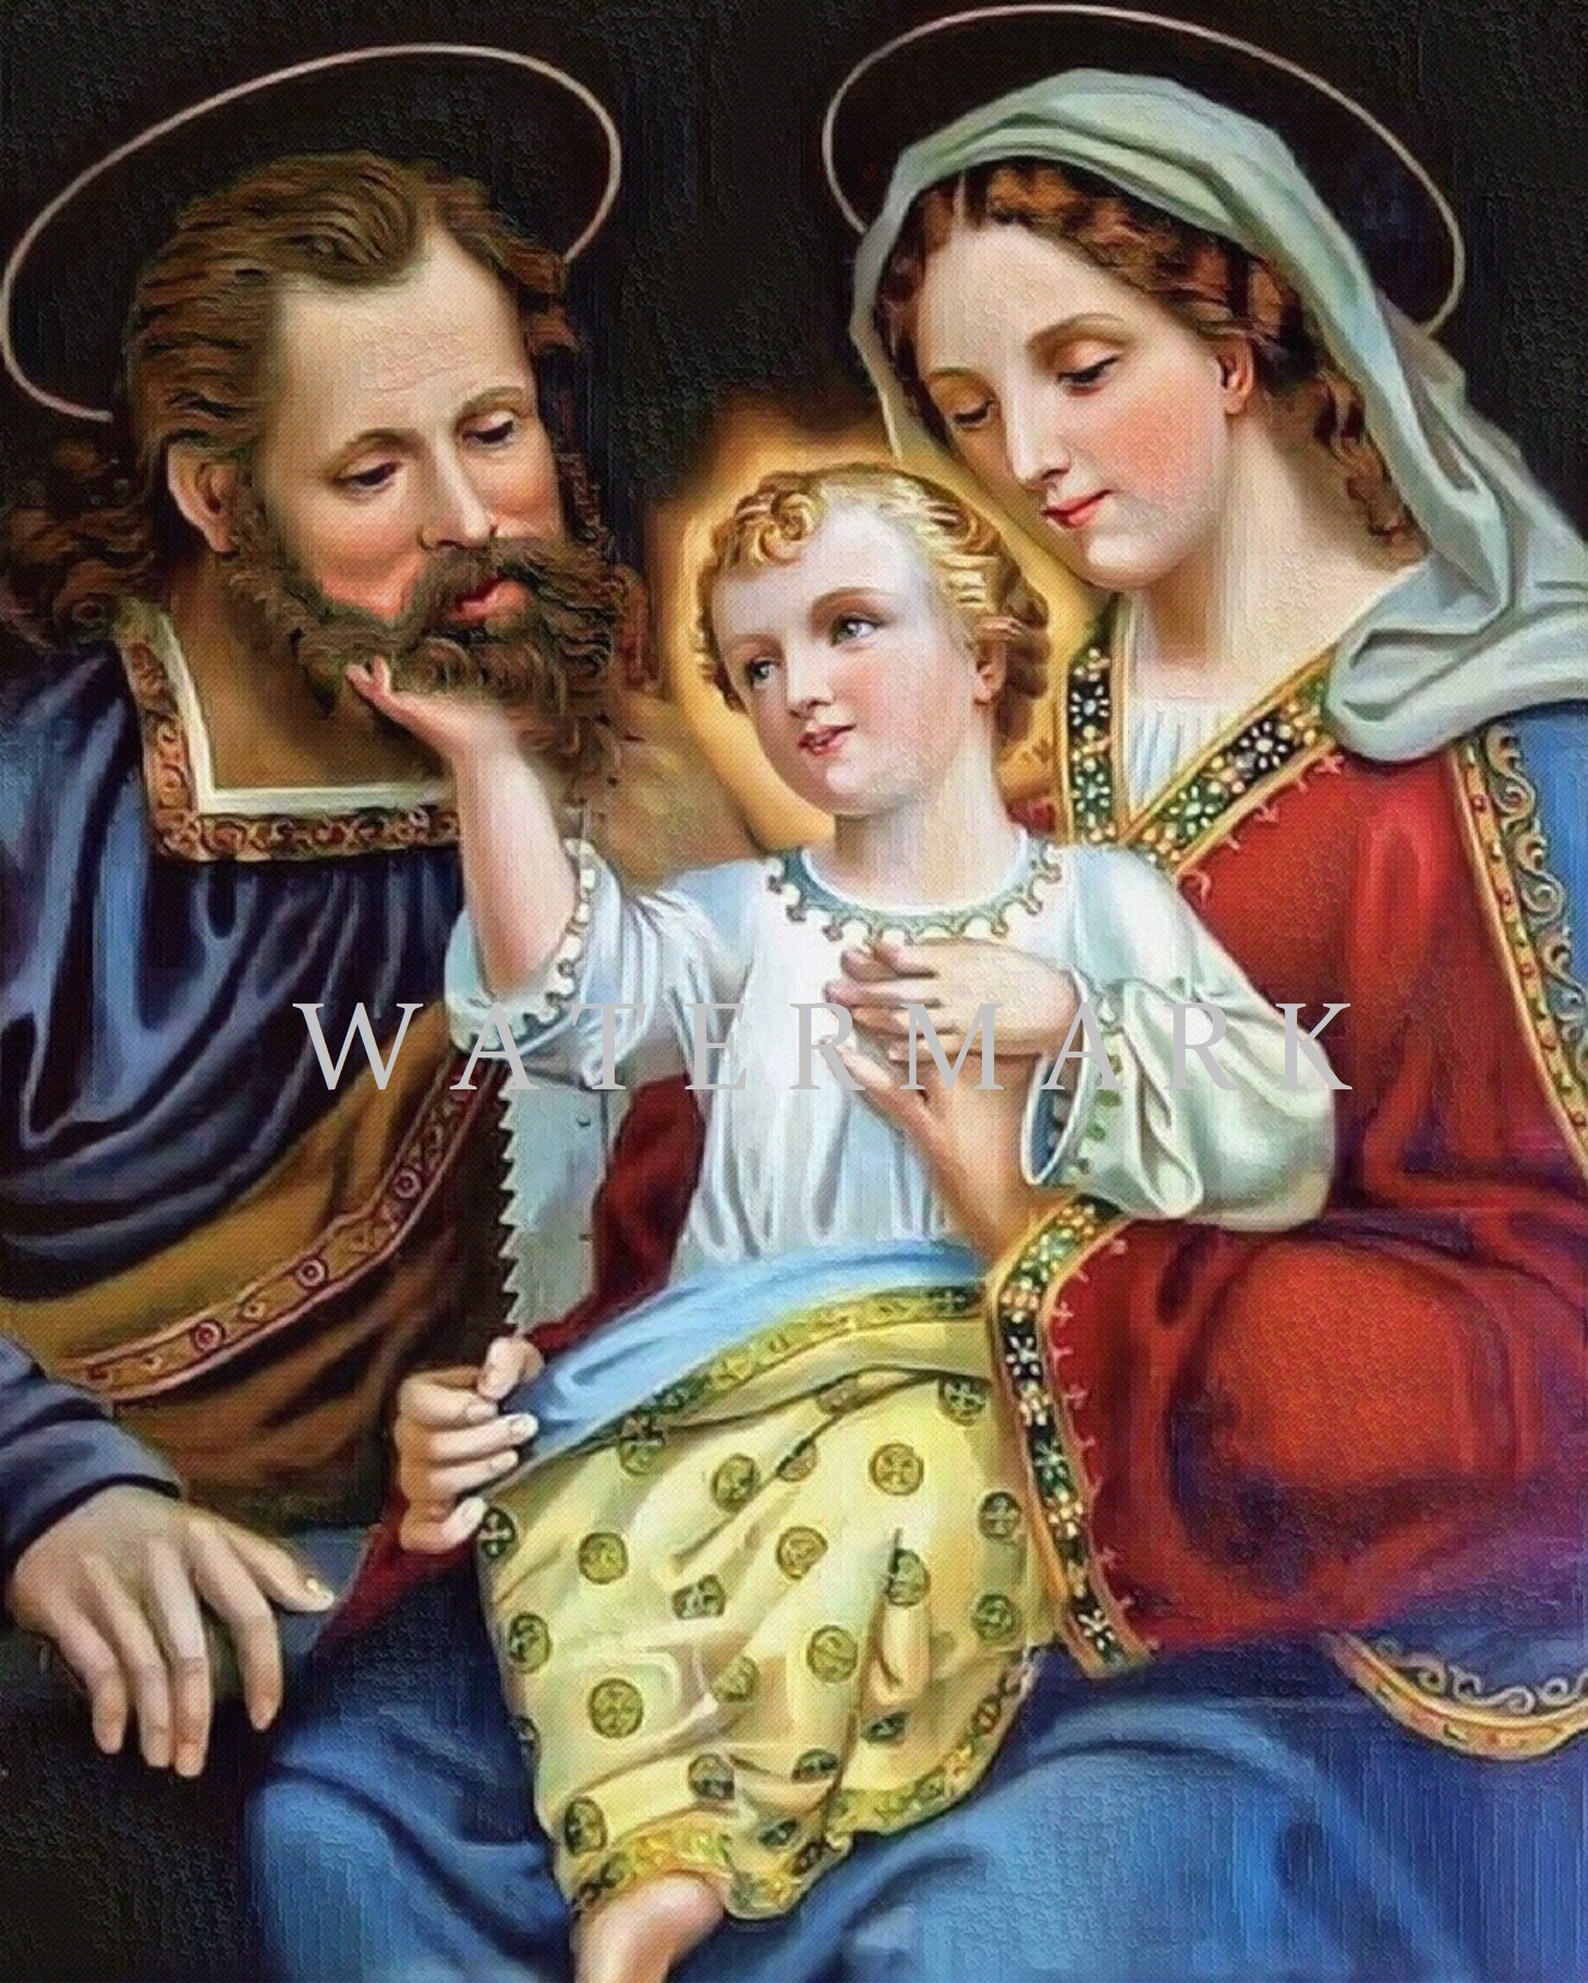 Customized and Restored Digital Oil Painting of the Holy - Etsy